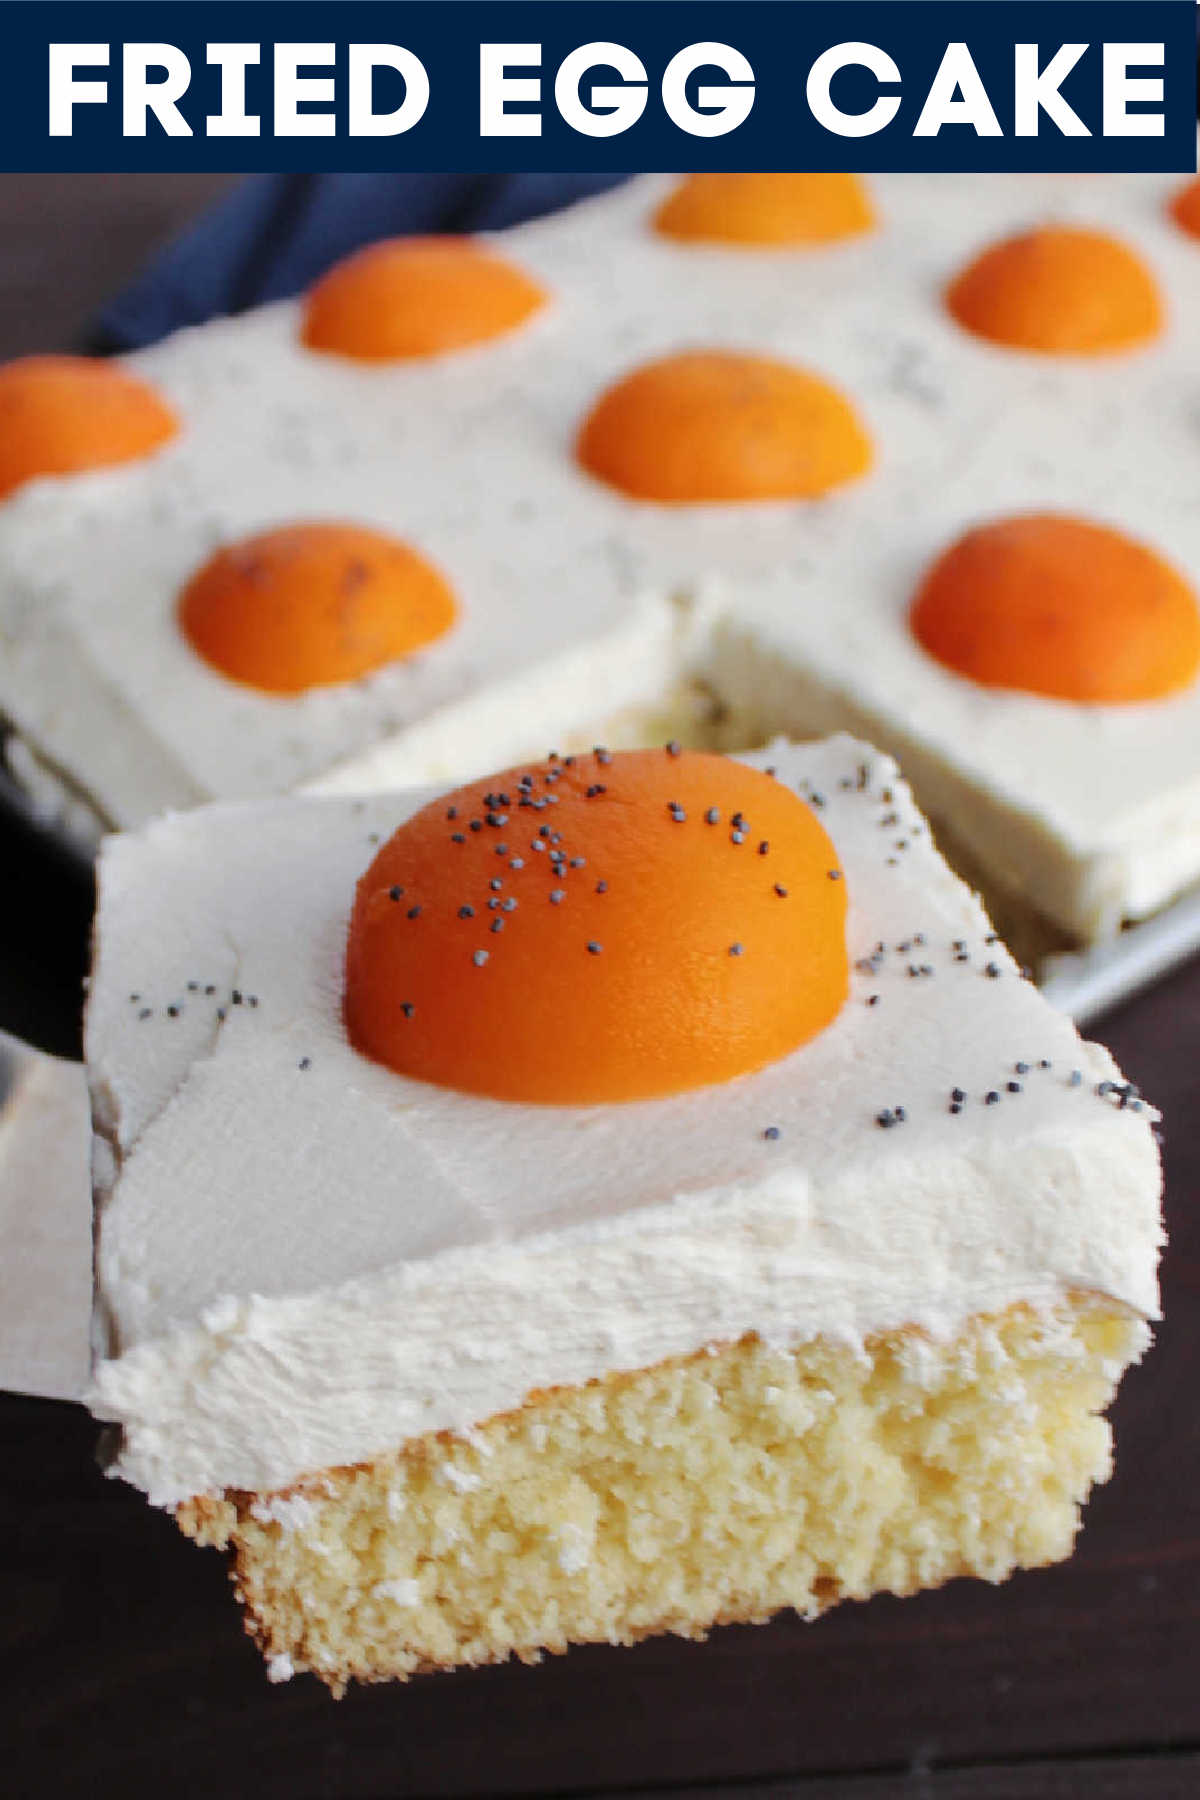 Make your sheet cake look like fried eggs. This recipe is an easy way to make dessert more fun. It's perfect for April Fool's Day, Easter or any day!